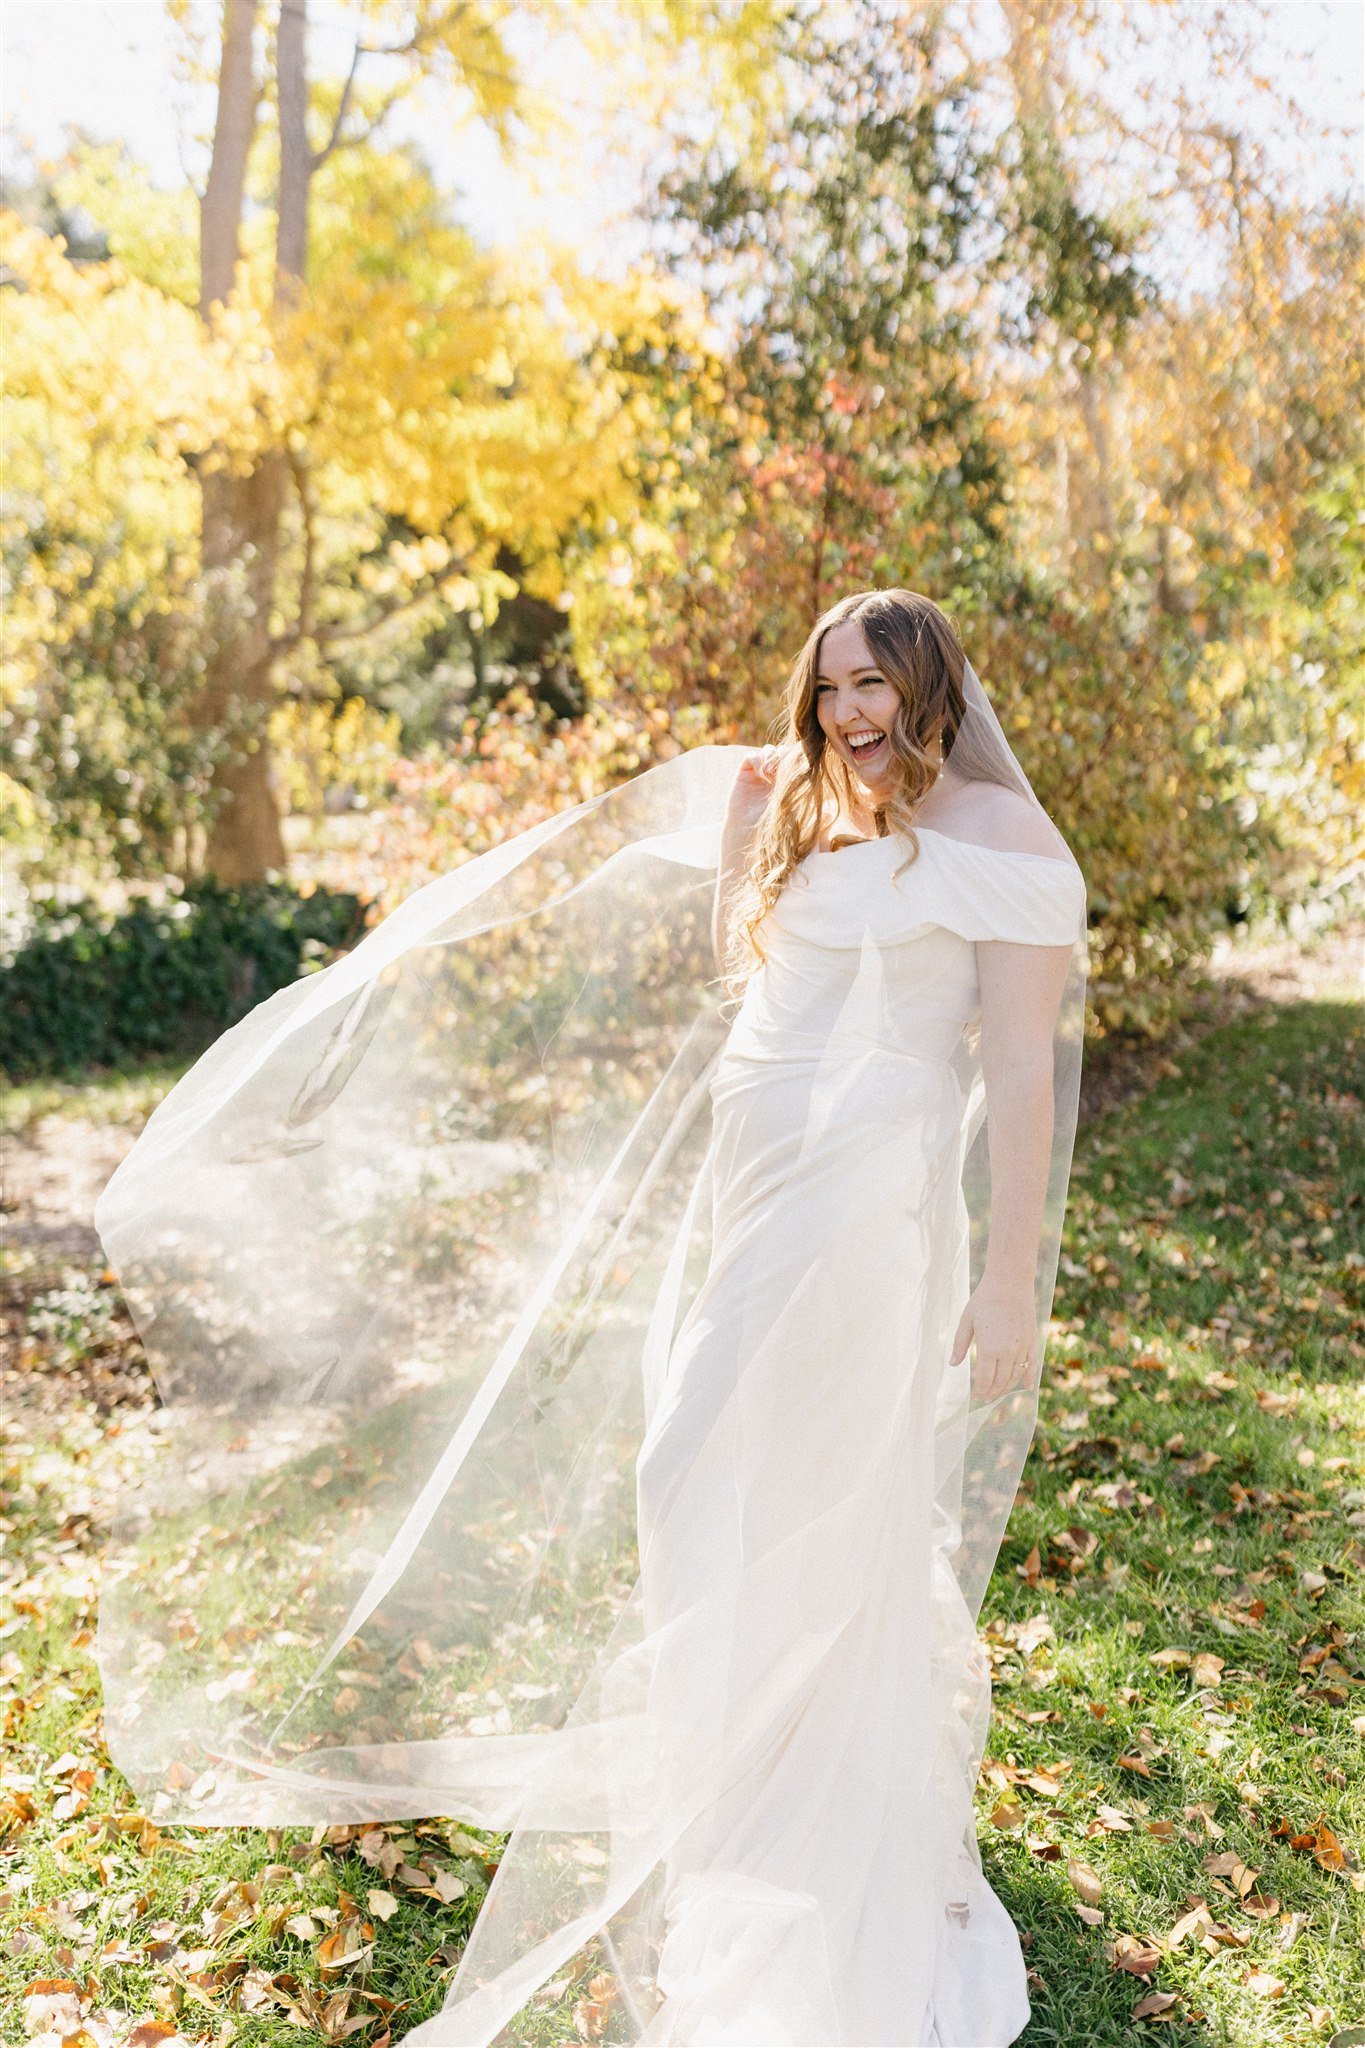 bride's veil flowing in the wind during epic first look at descanso gardens